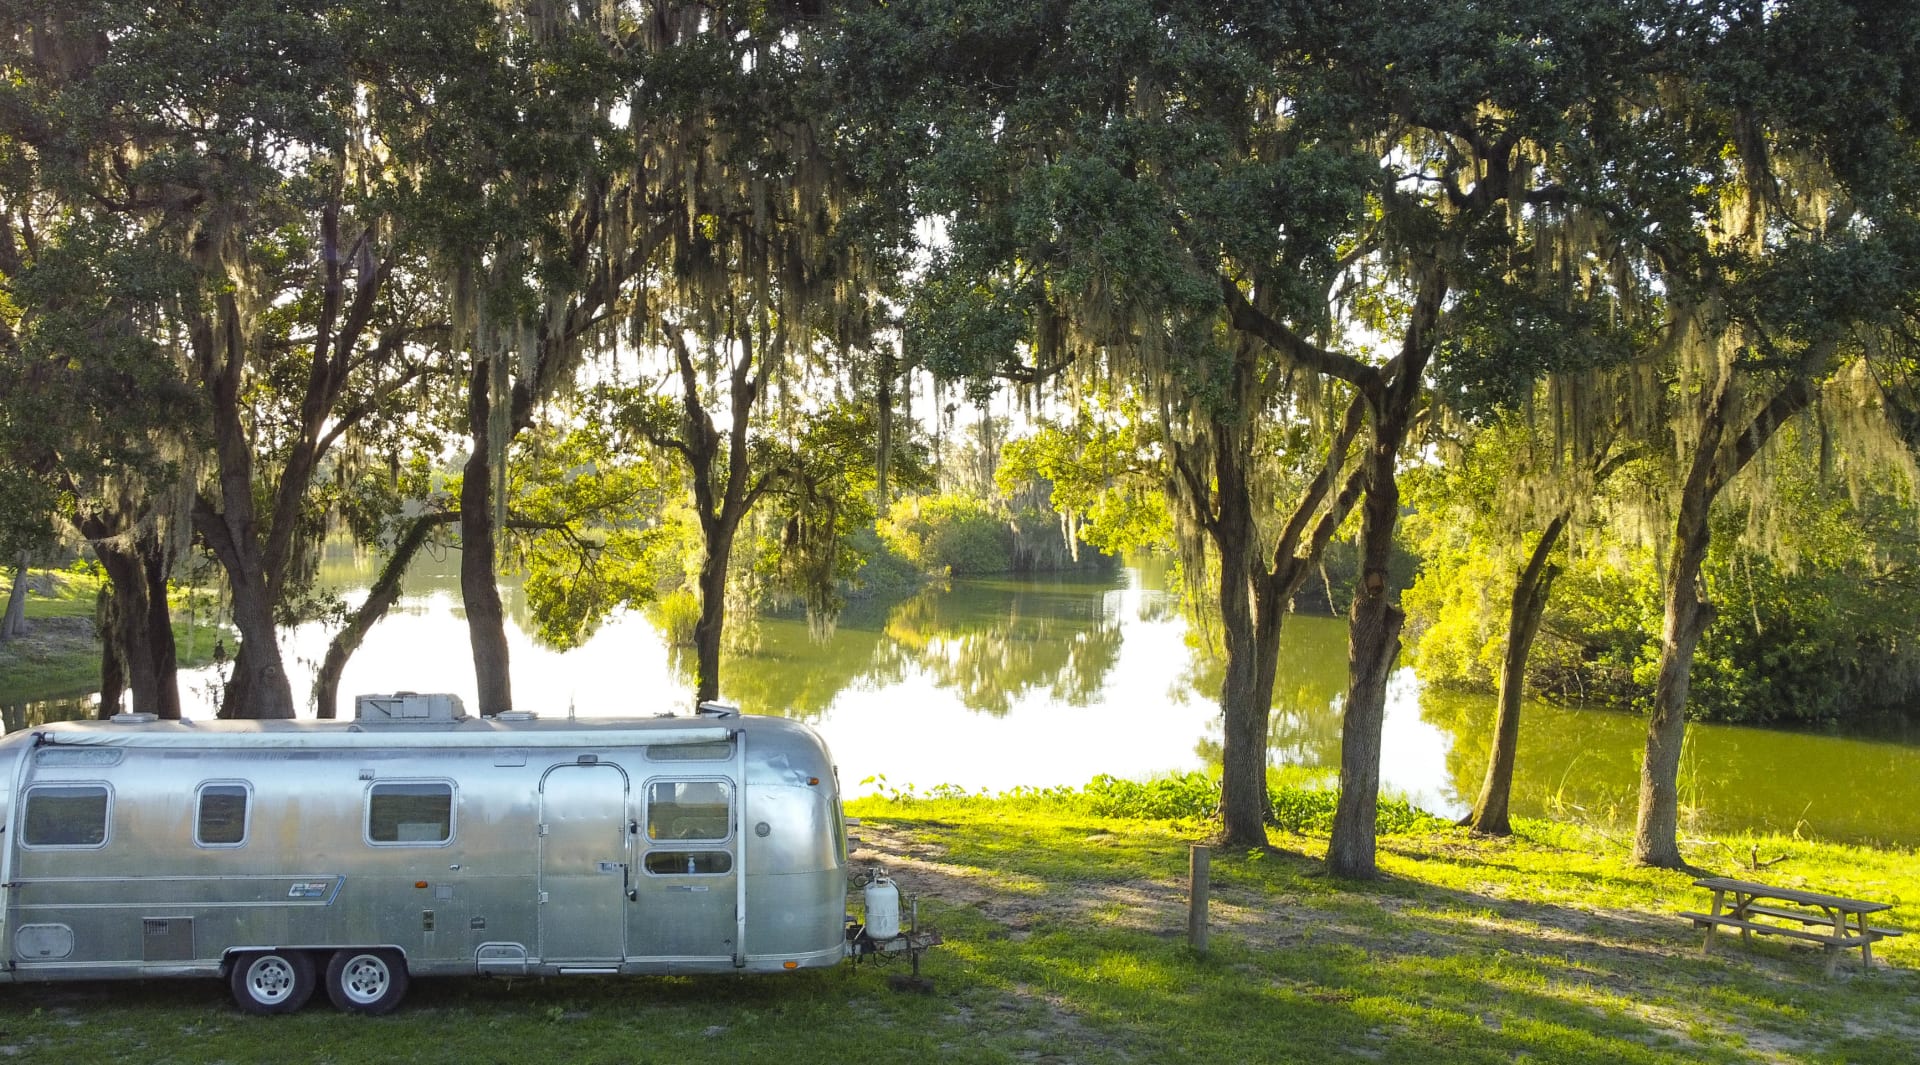 Pull up your RV and enjoy Beautiful Scenic View of Gorgeous Saddlecreek Lake.